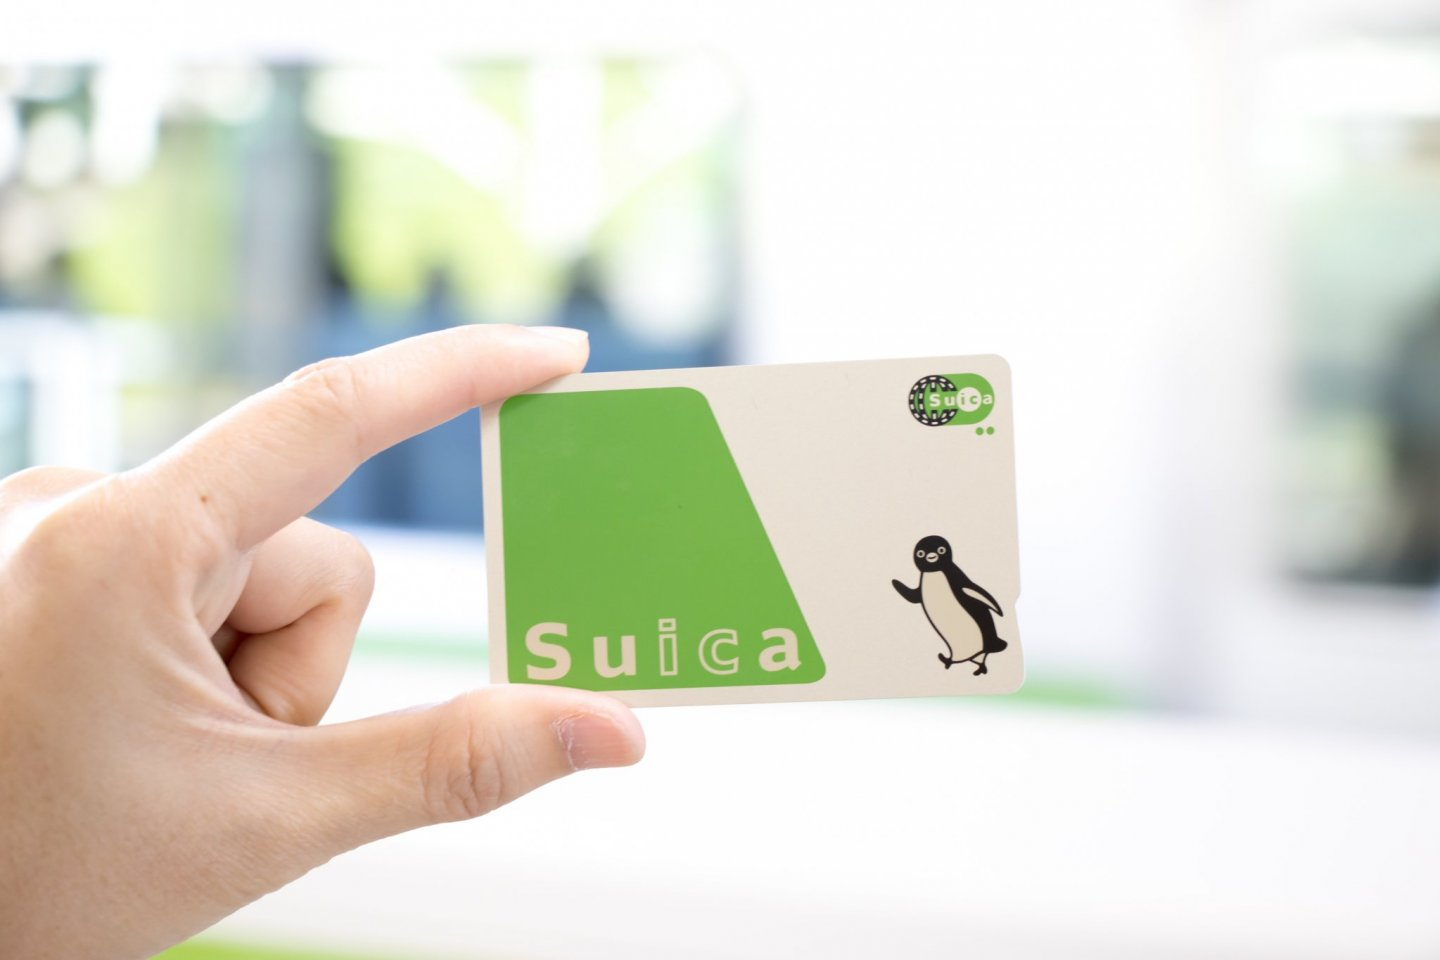 Do you have any Suica card?